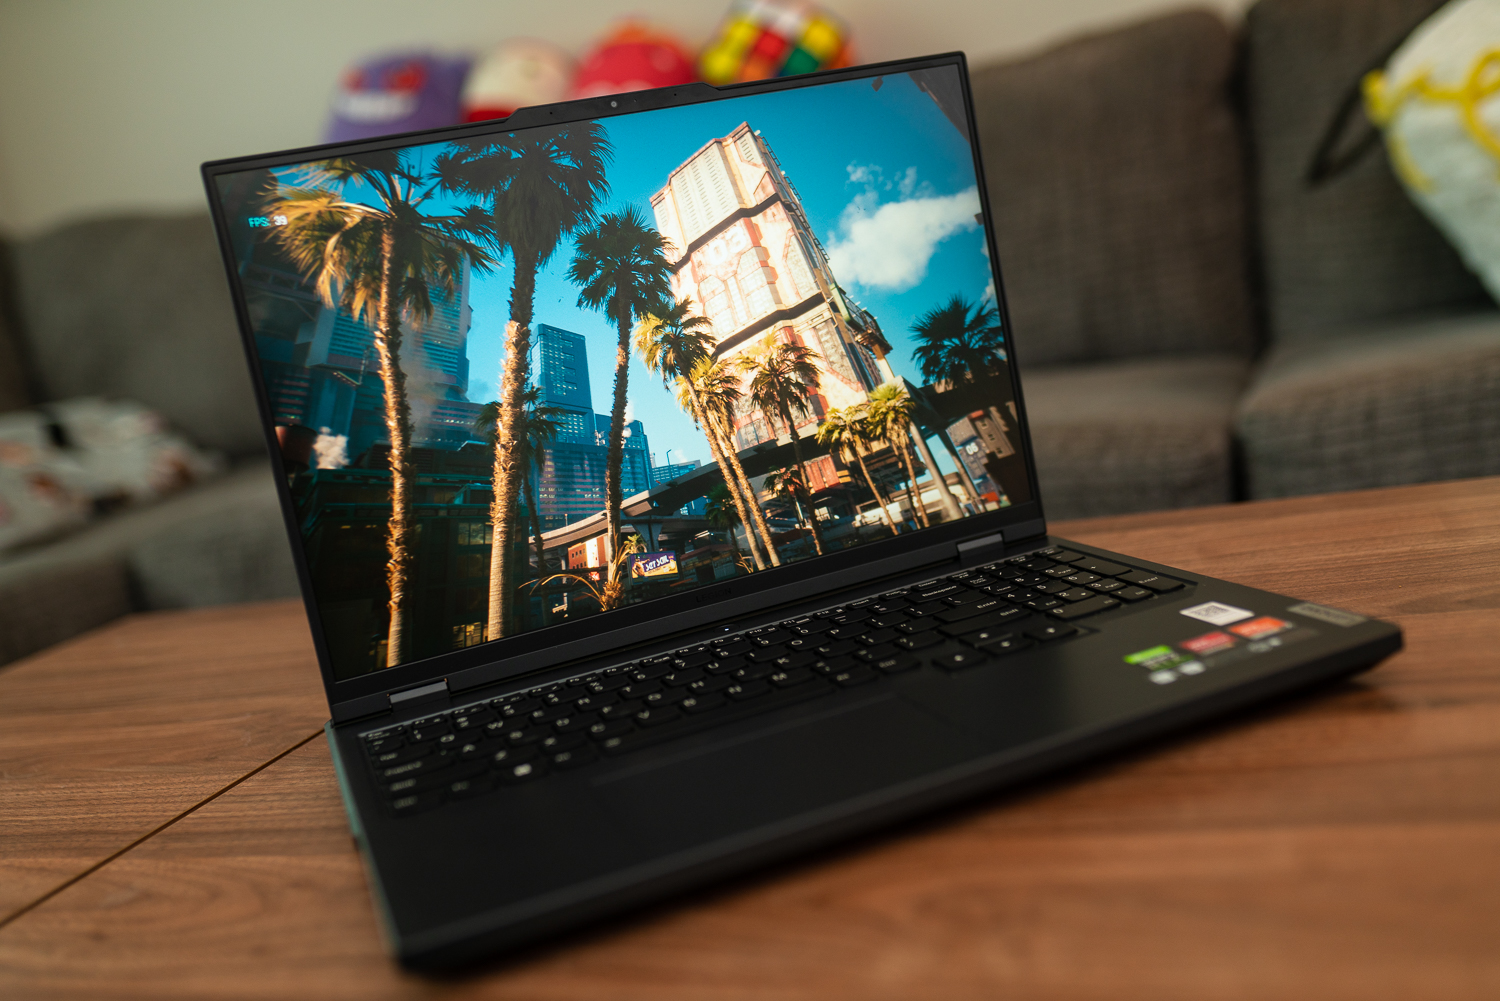 The best gaming laptop in 2023 — under $1,000, 4K, and more